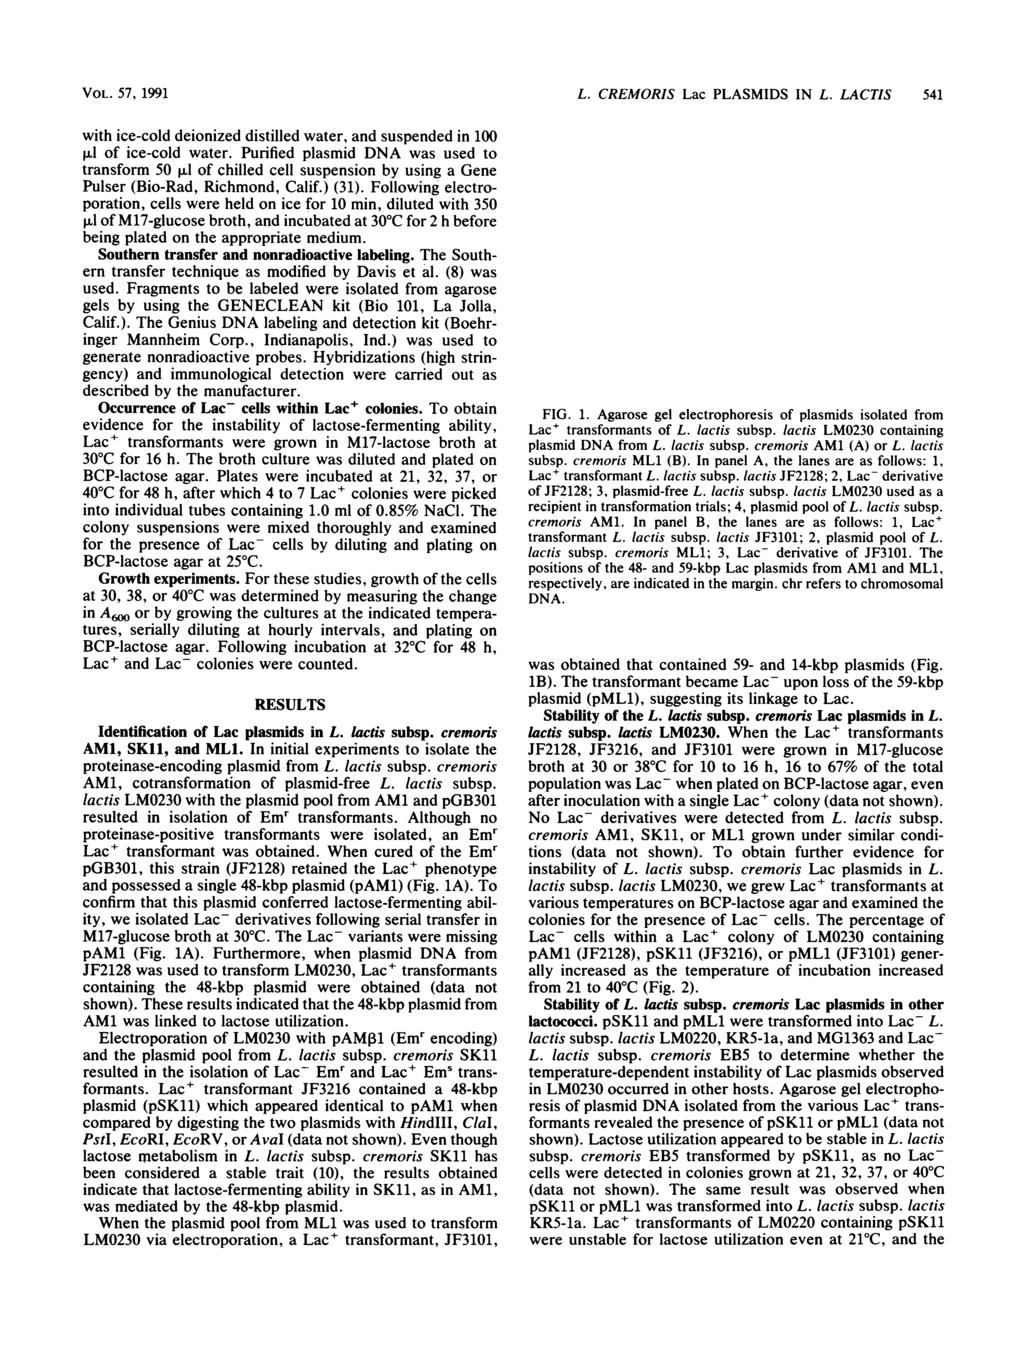 VOL. 57, 1991 with ice-cold deionized distilled water, and suspended in 1 pi of ice-cold water.